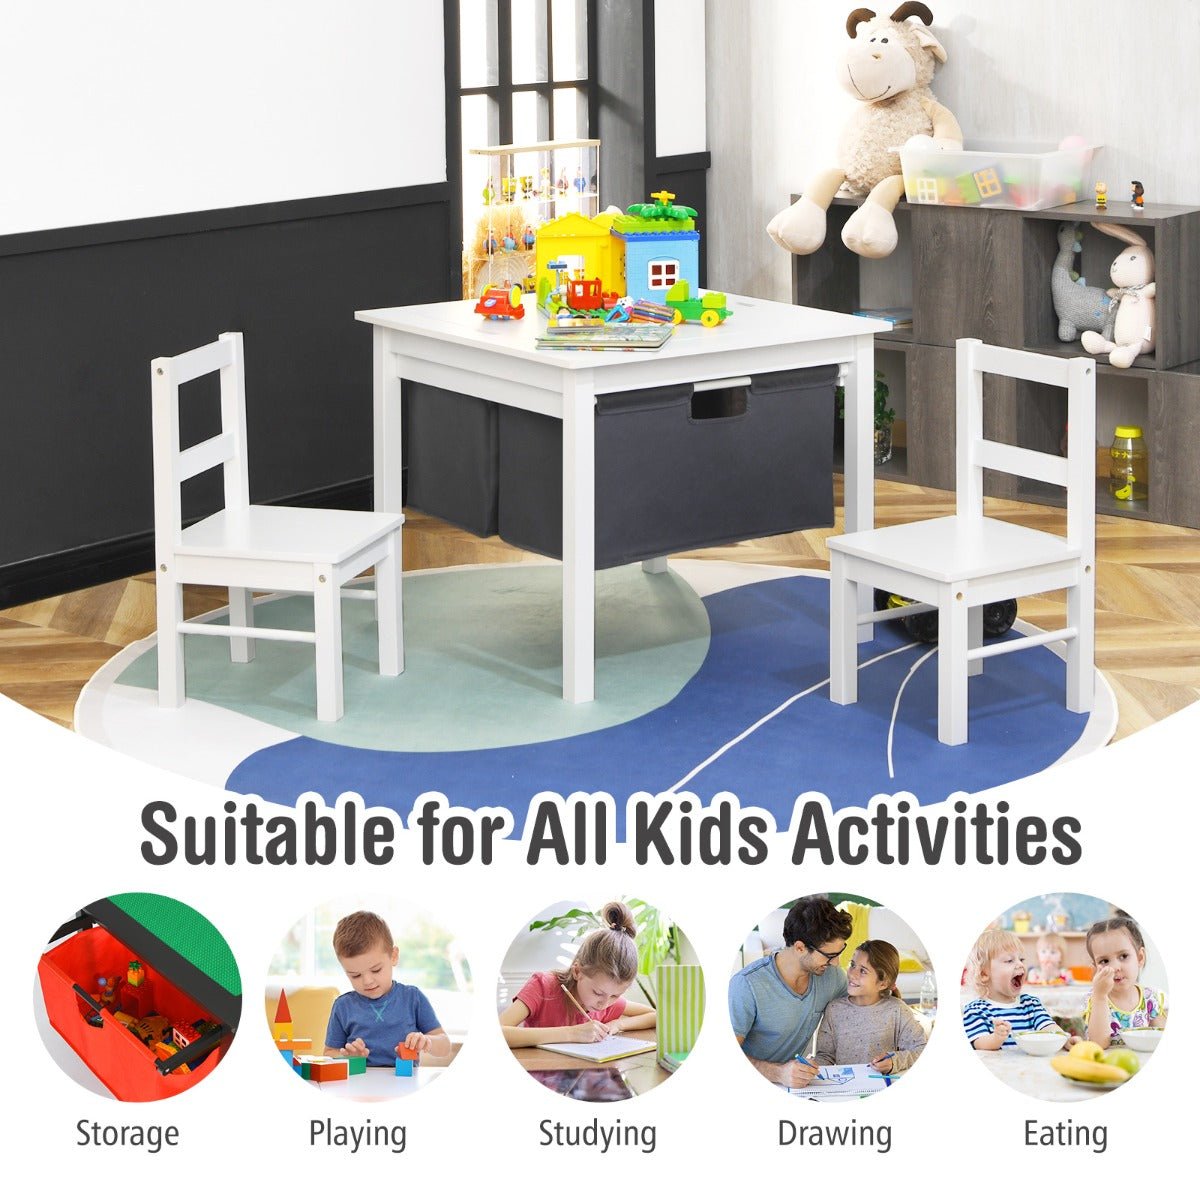 Experience Organized Playtime with the White Activity Table